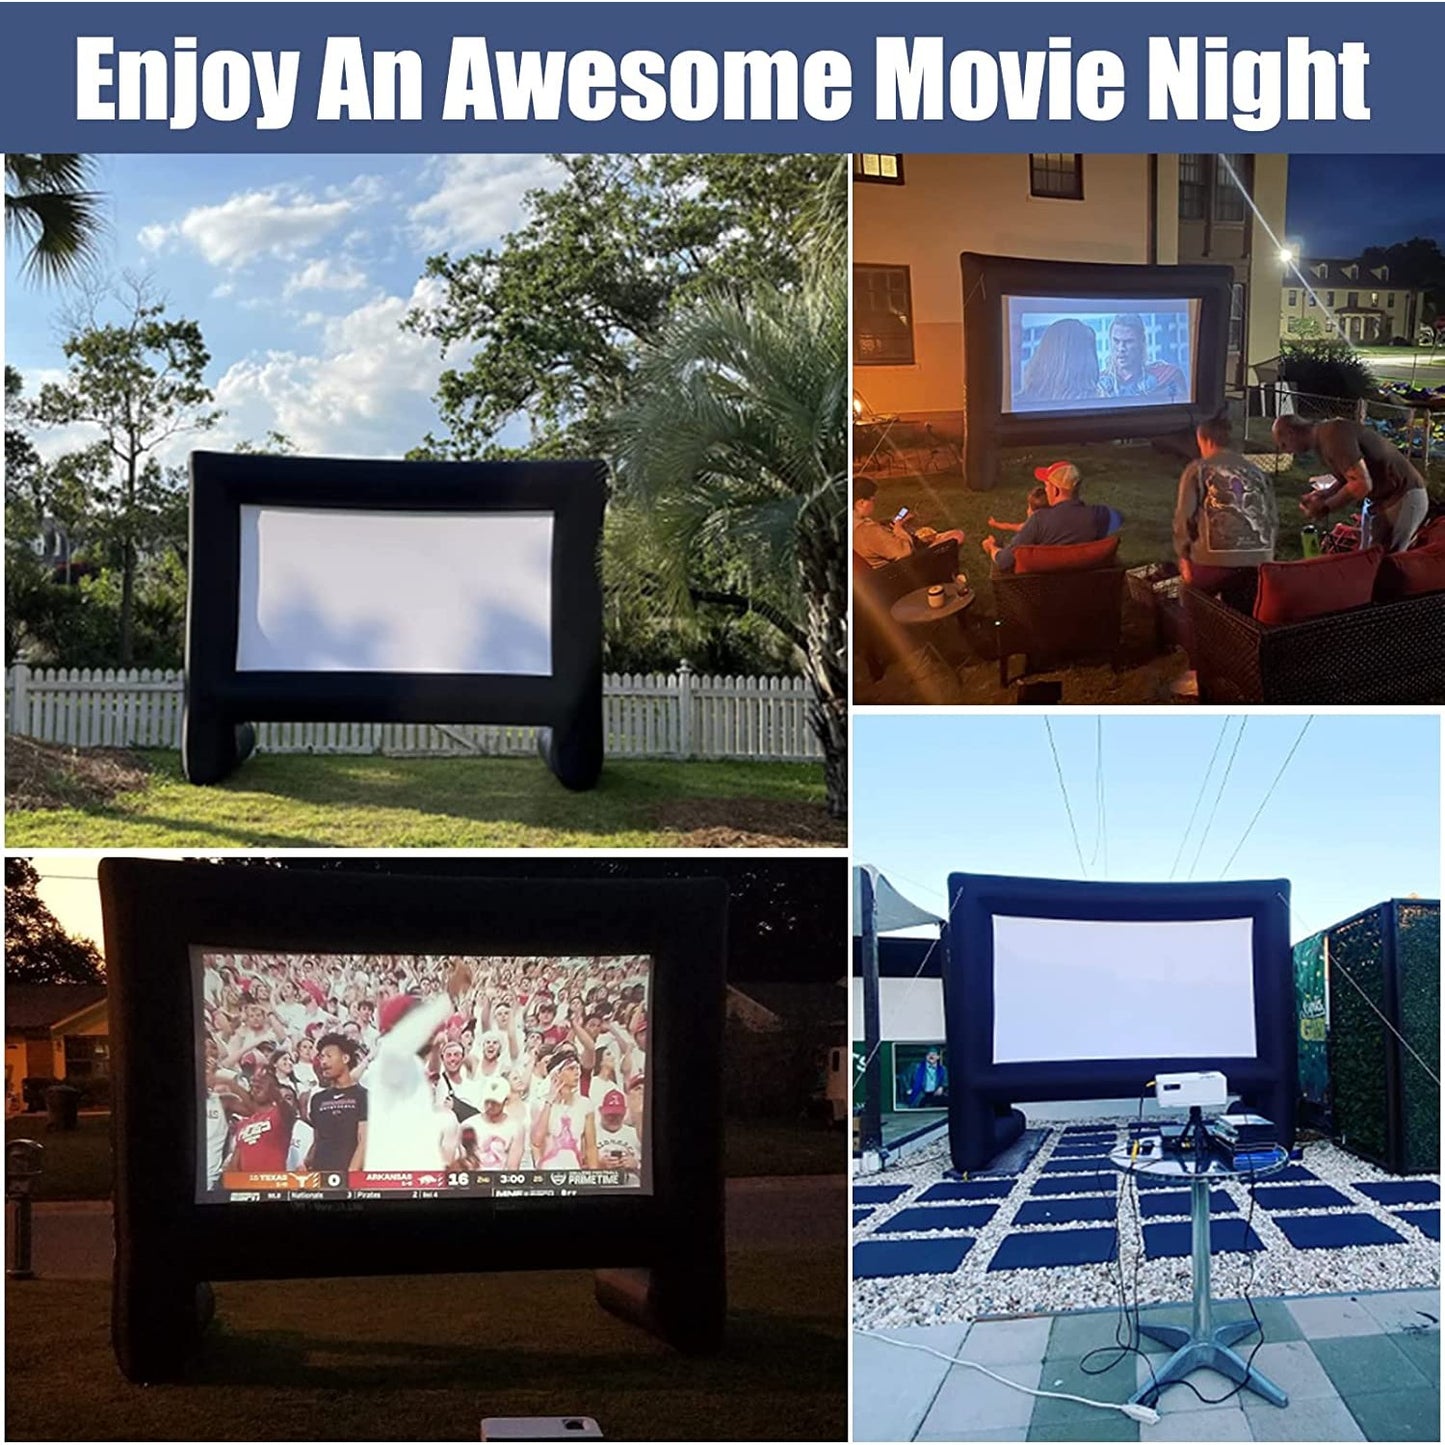 A collage of four photos each showing a giant inflatable outdoor movie screen in various locations.